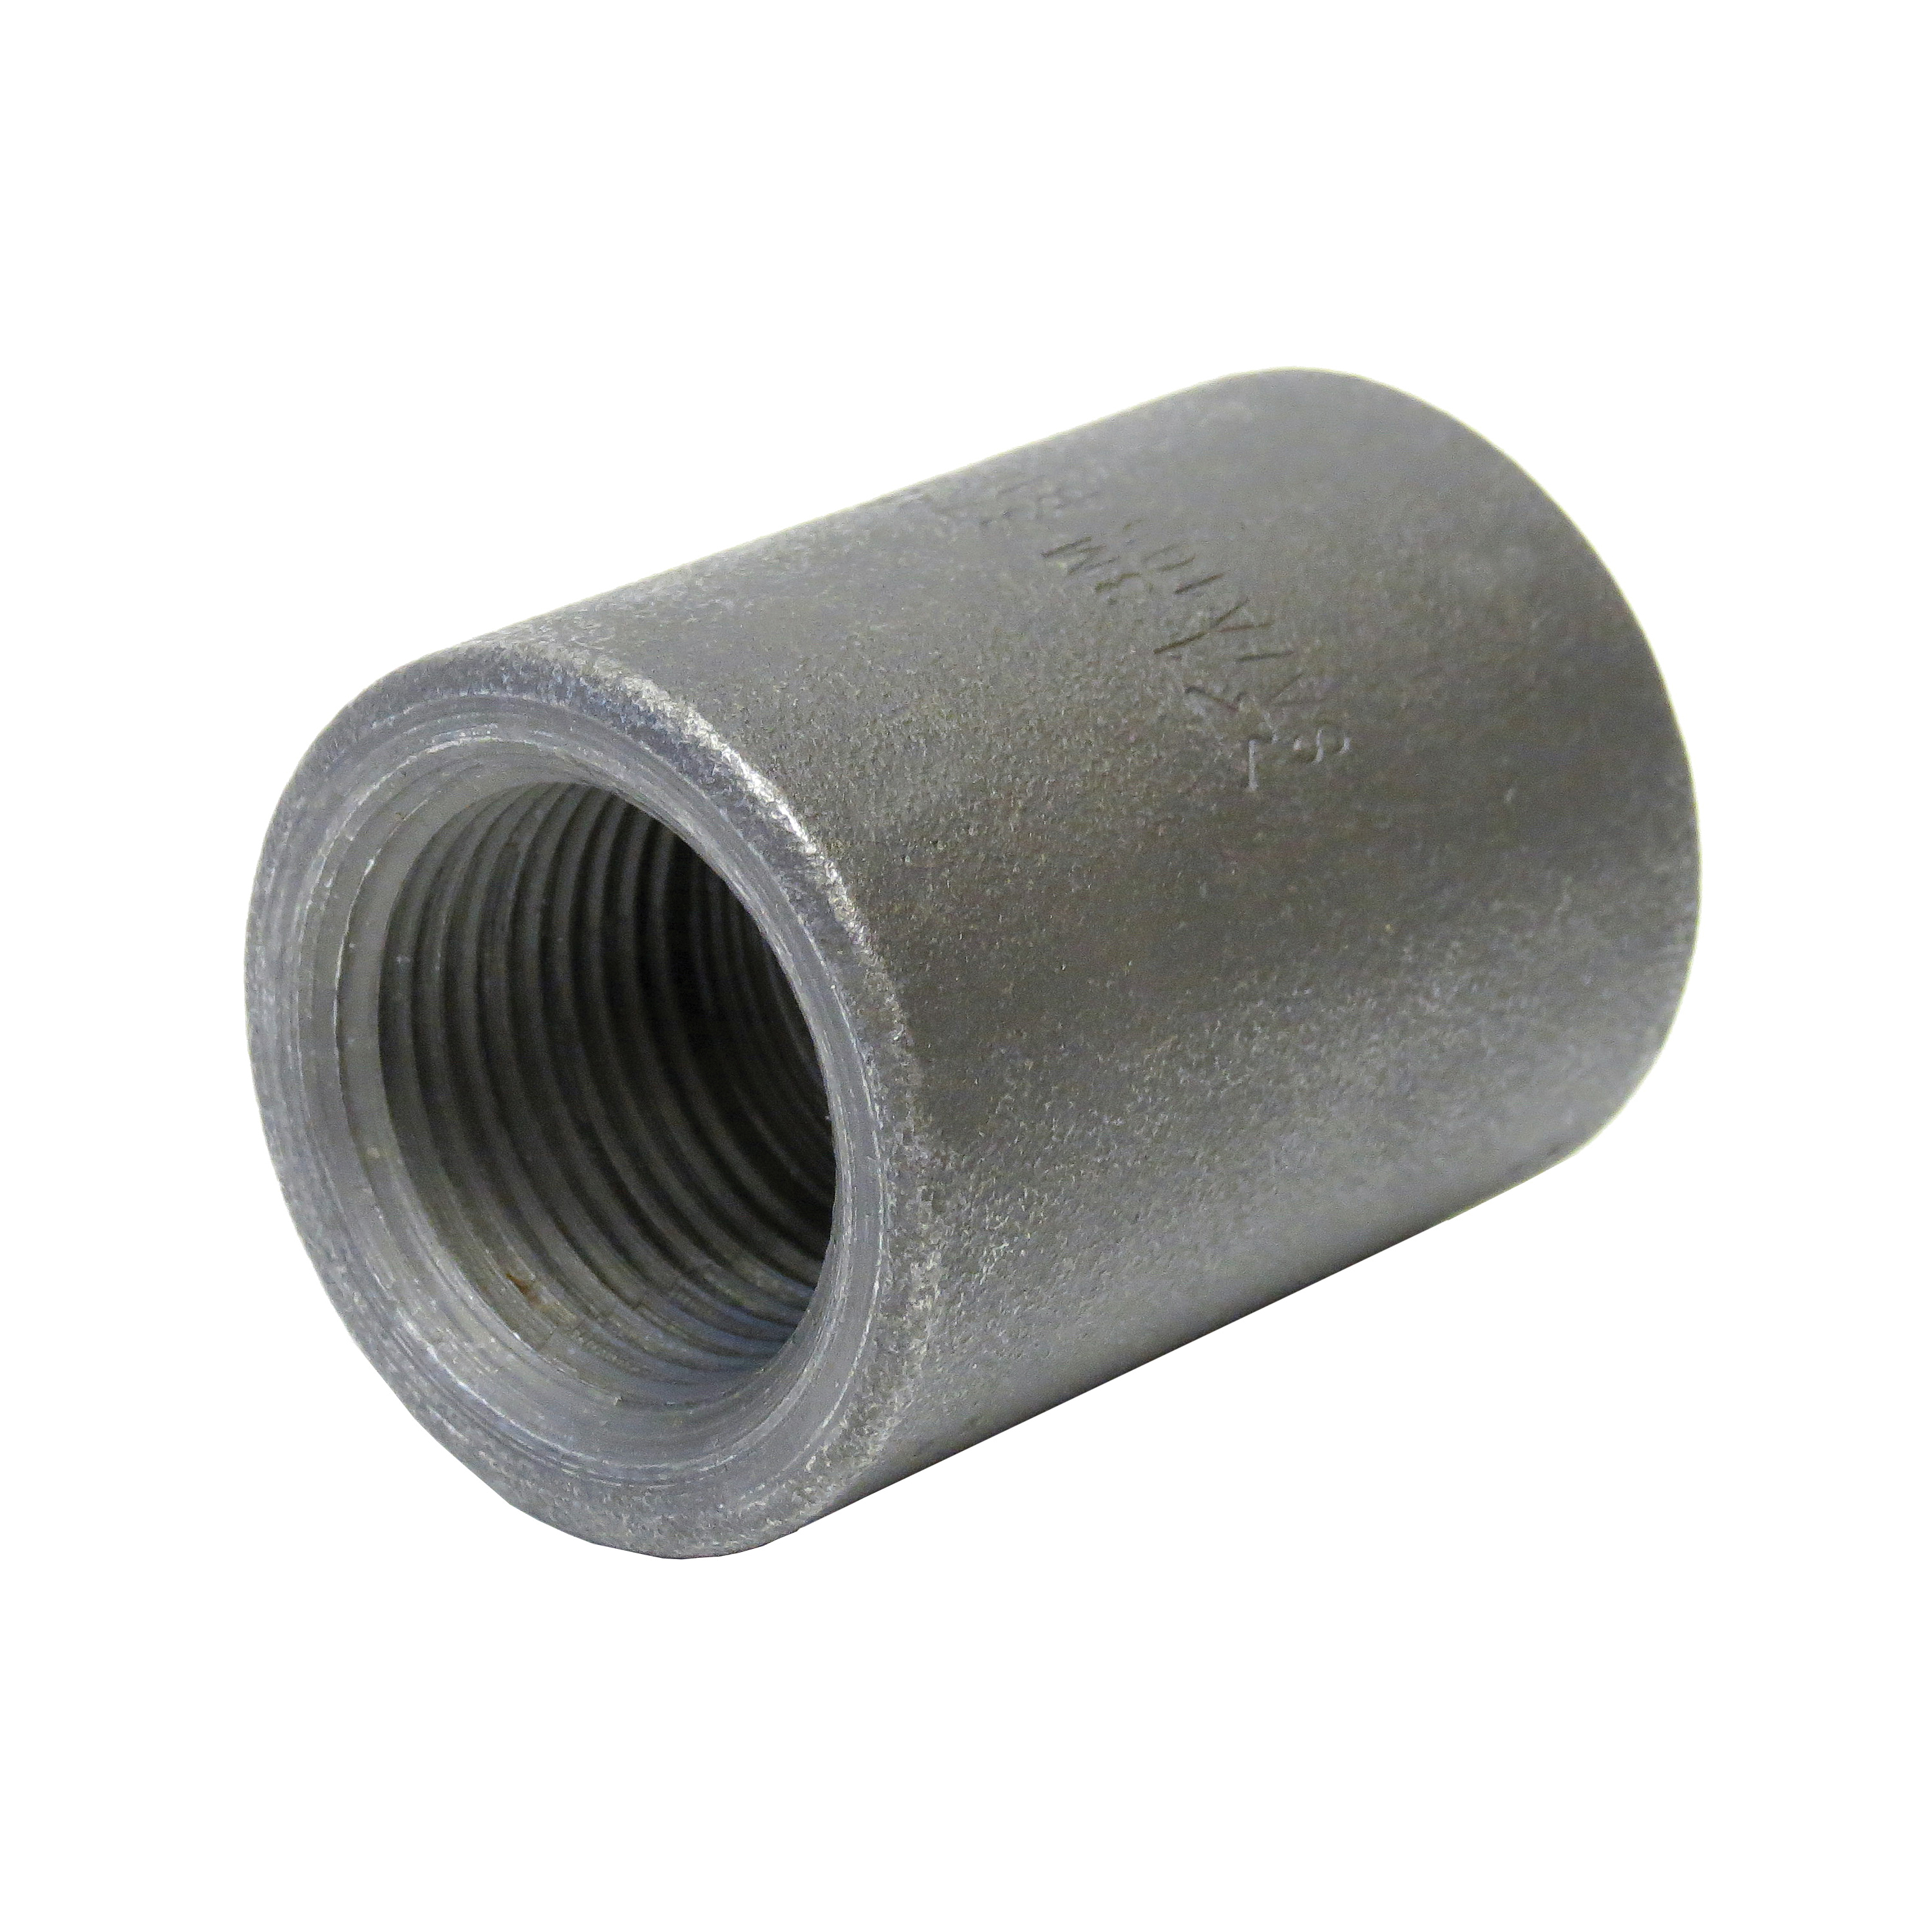 Anvil® 0361156409 FIG 2117 Pipe Coupling, 1-1/2 in Nominal, FNPT End Style, 3000 lb, Steel, Black Oxide, Domestic